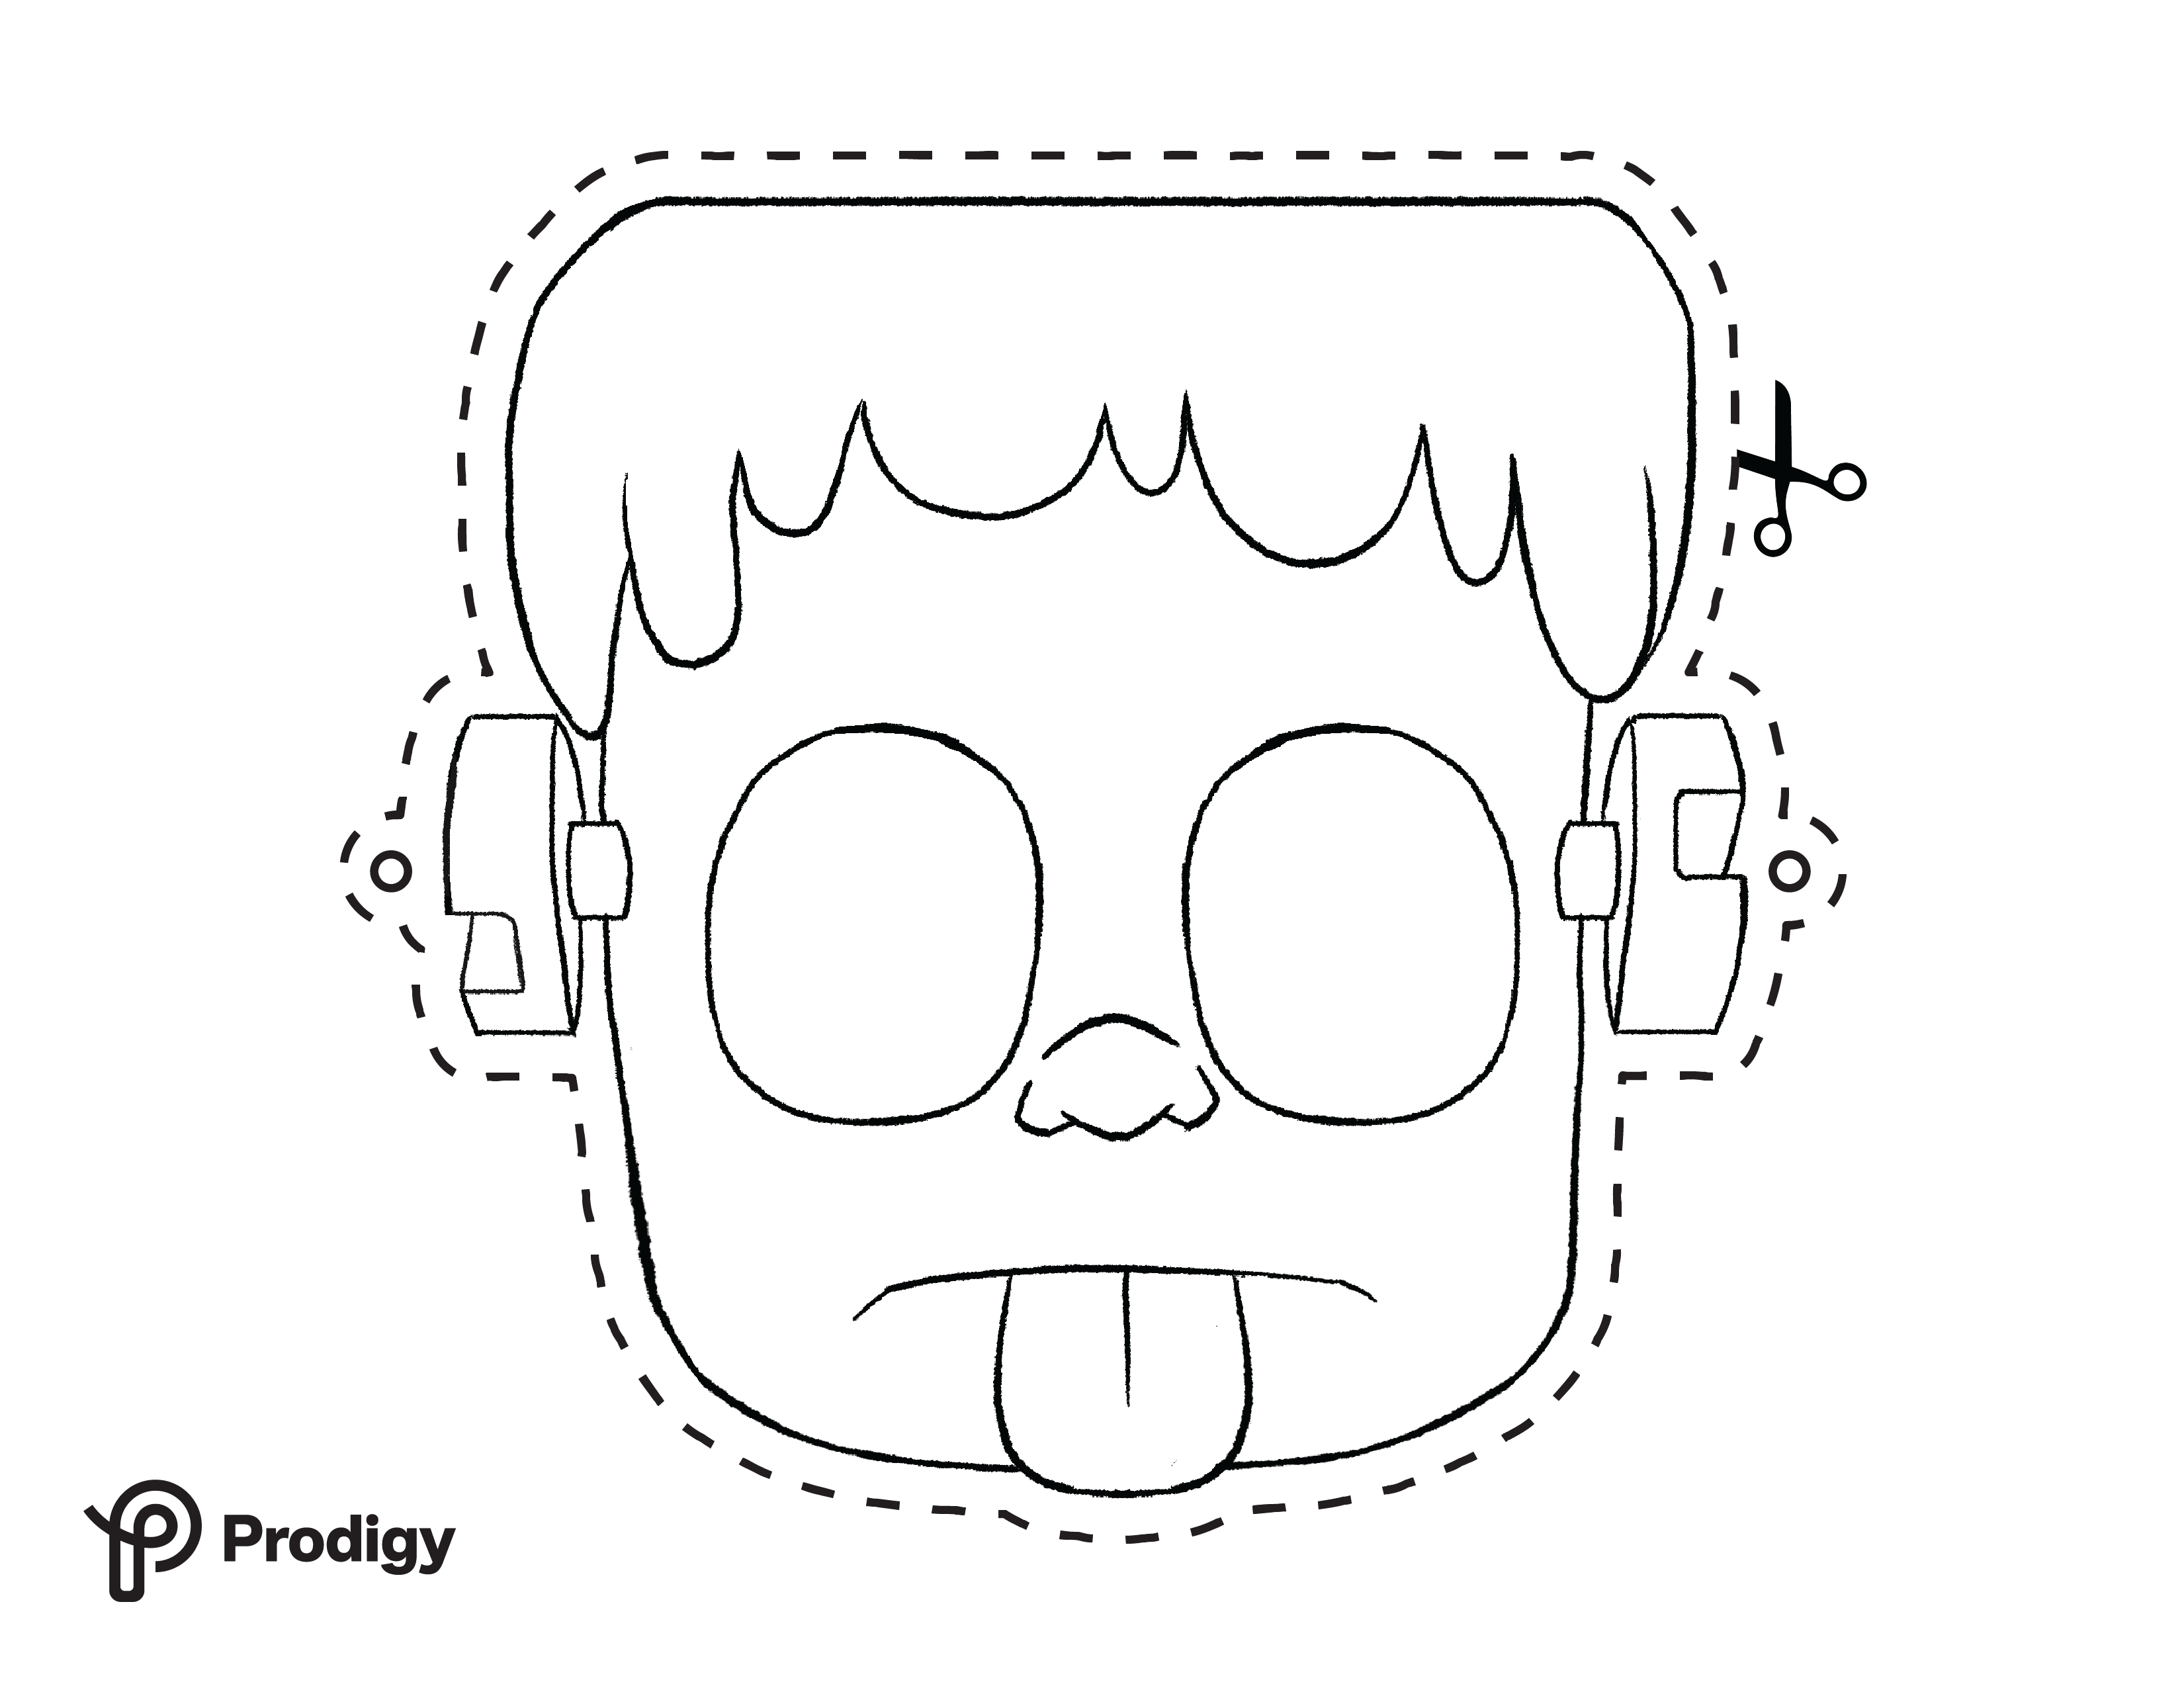 Printable Prodigy Frankenstein monster mask in black and white coloring page